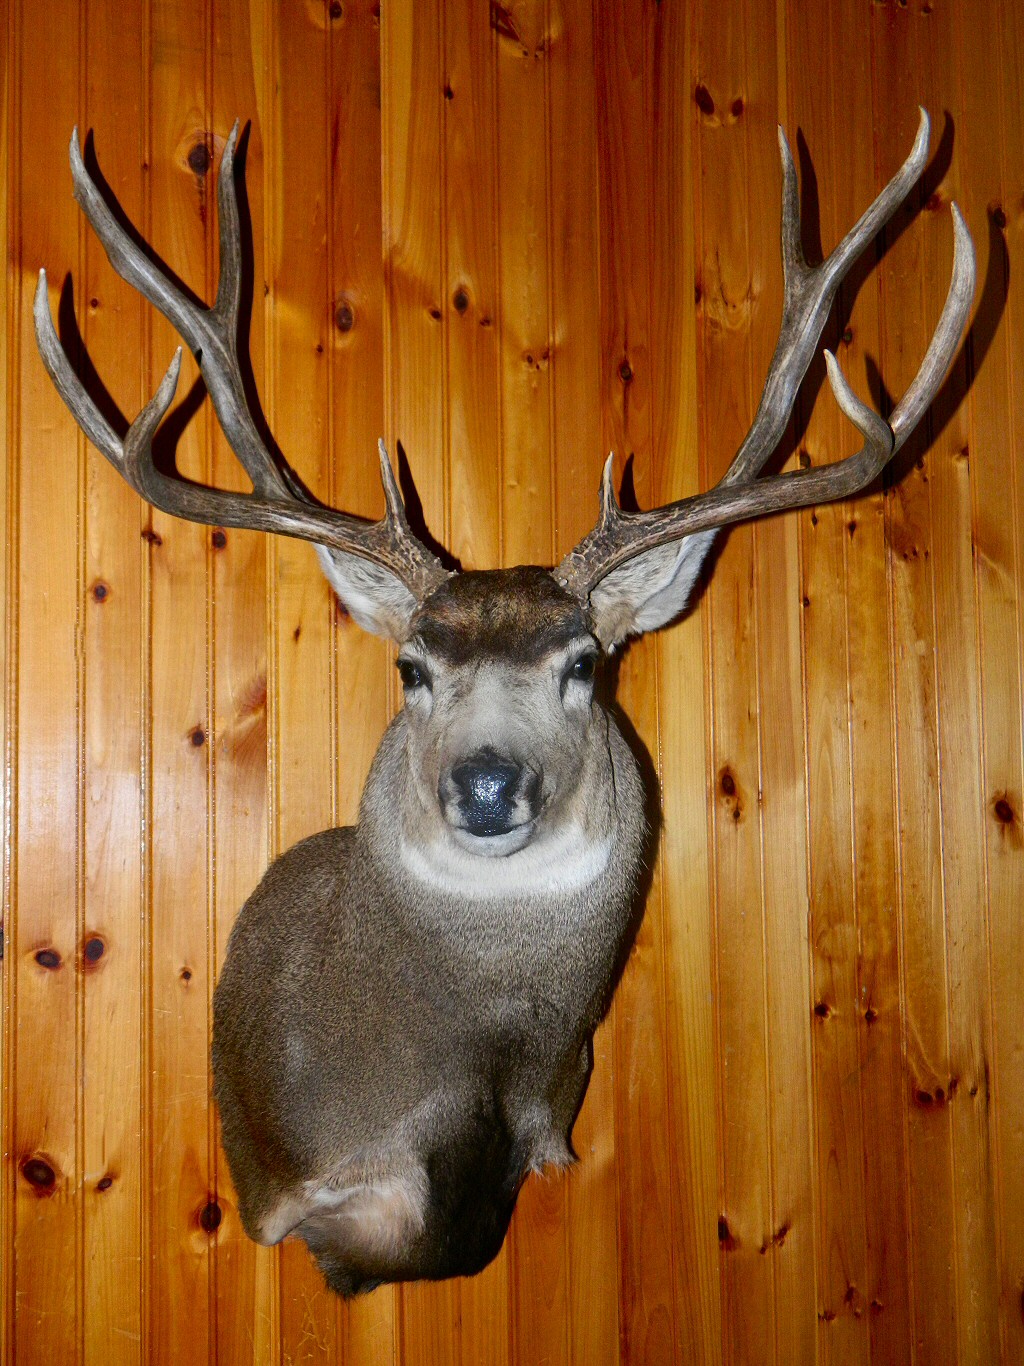 Call us to discuss your Mule Deer Mounting Ideas, Mule Deer Poses, Mule Deer Shoulder Mount, Mule Deer Sneak Semi Sneak, Mule Deer Pedestal Mounts and more. Tell us what Mule Deer Mount ideas you may have. 